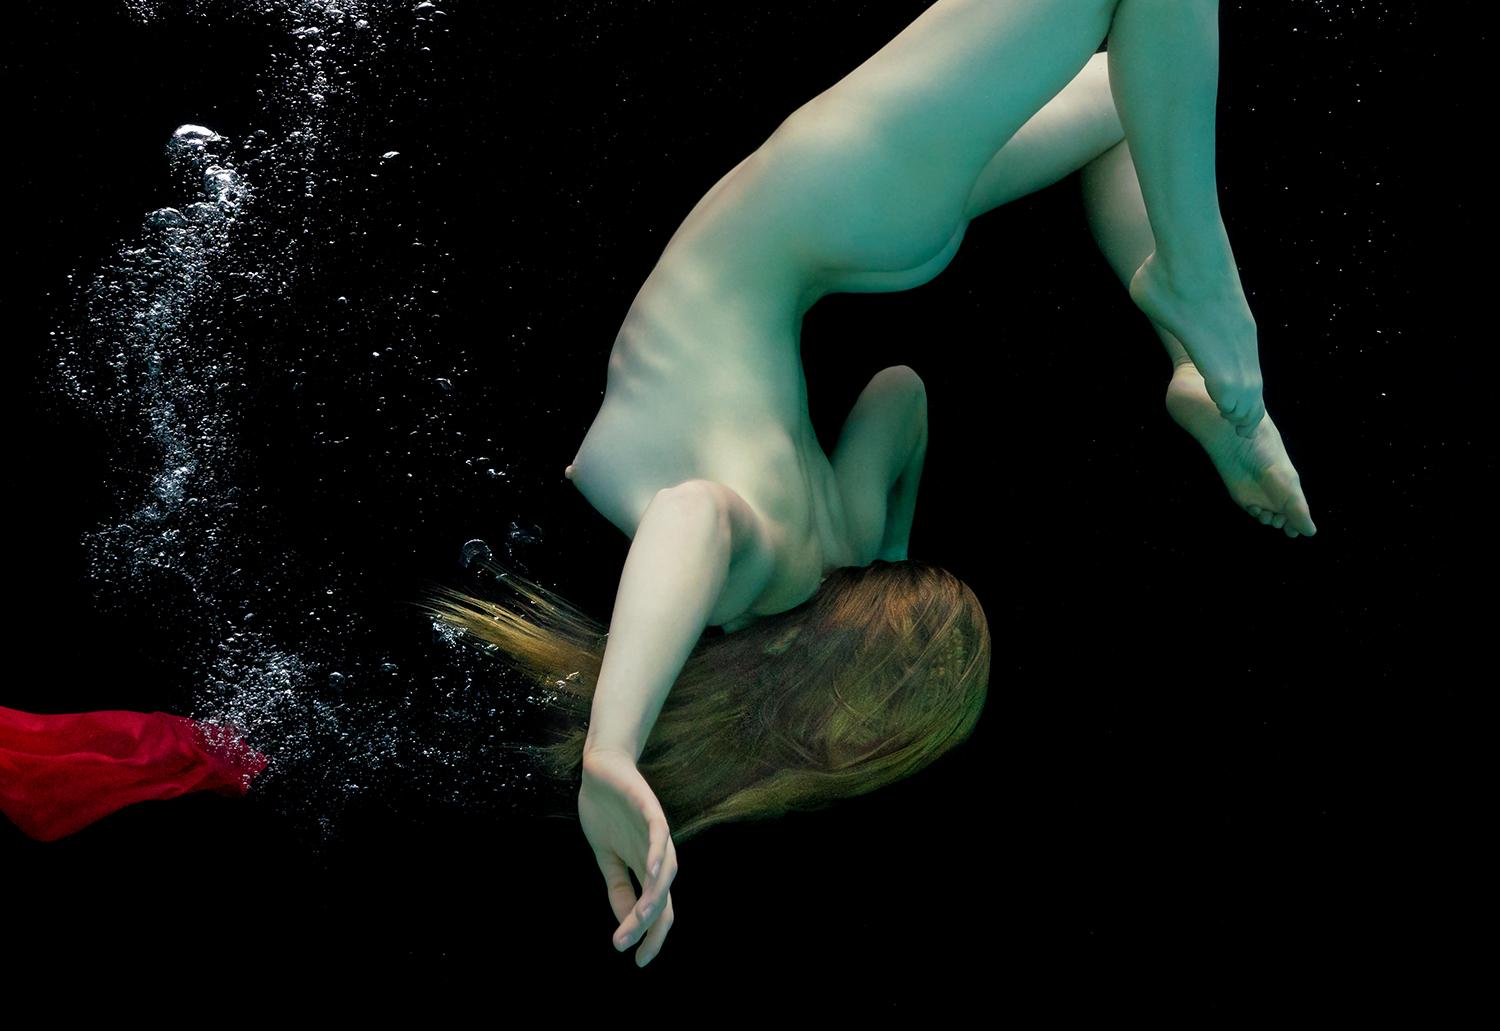 Free Fall - underwater nude photograph - archival print 17 x 23.5